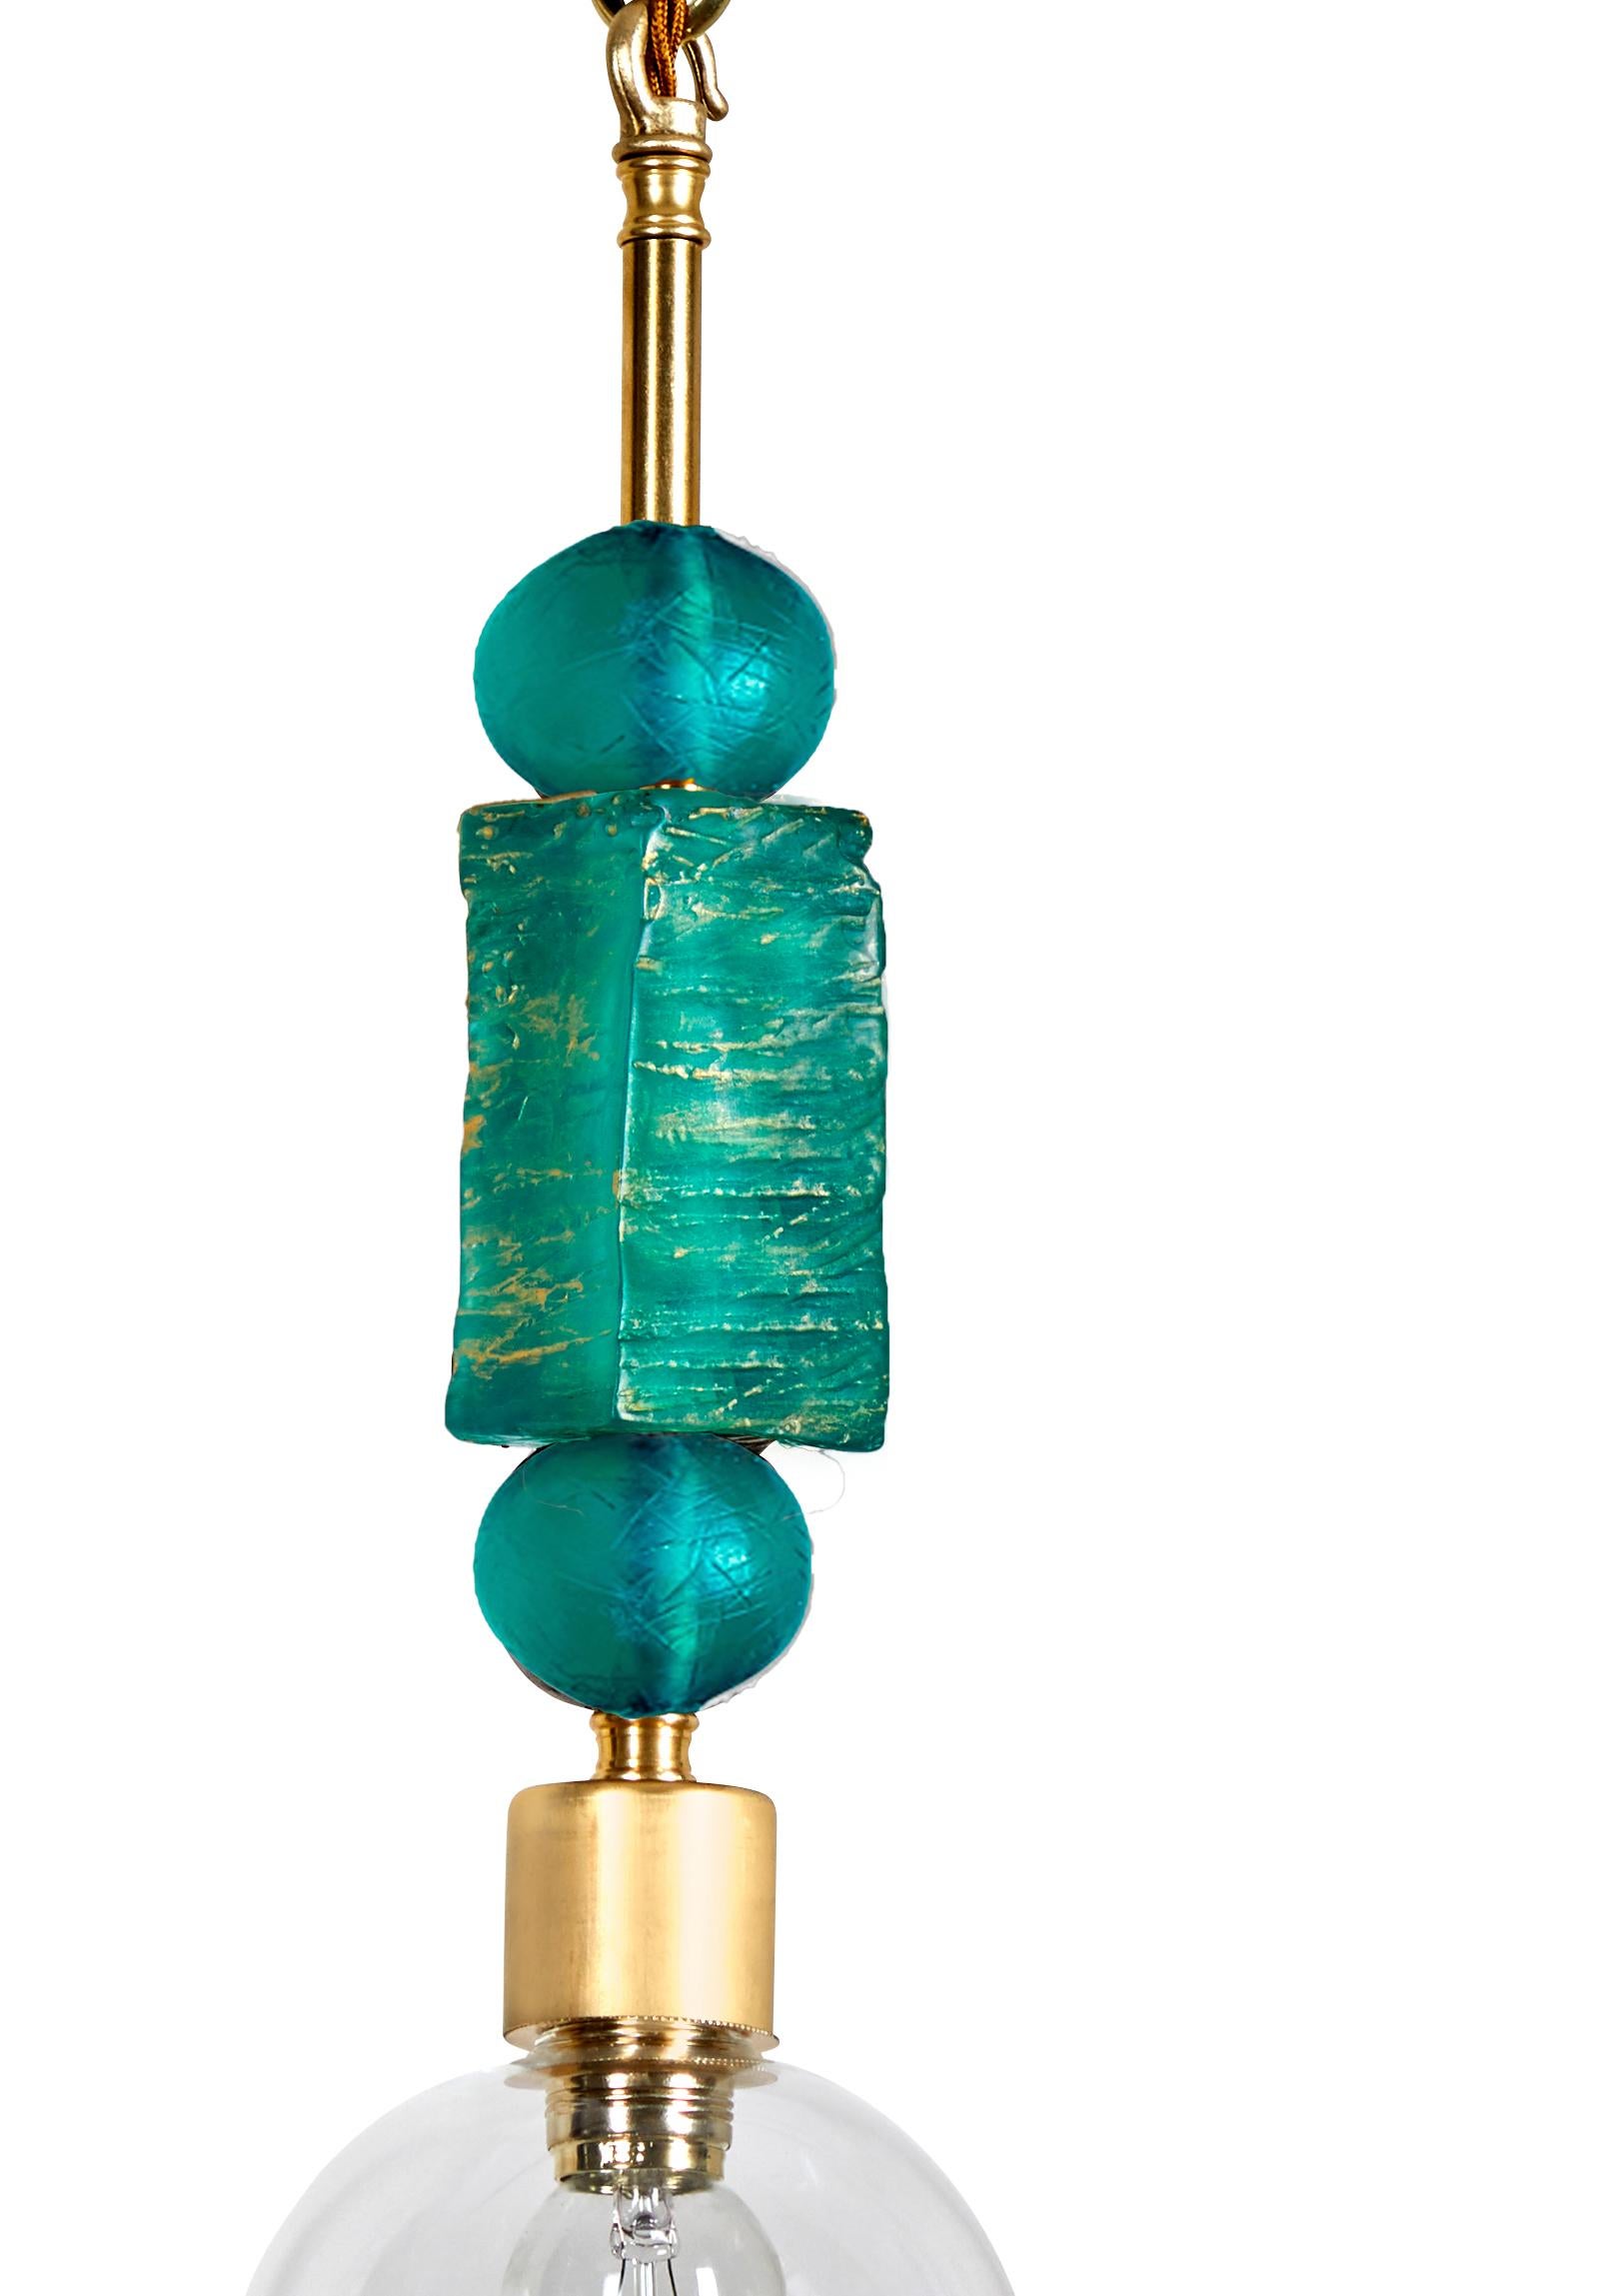 This Margit Wittig pendant (ceiling light) features two pearl shaped and cuboid bio-resin elements which are cast and hand patinated in her London studio. Each component is finished with several pigment and wax layers to enhance their unique surface